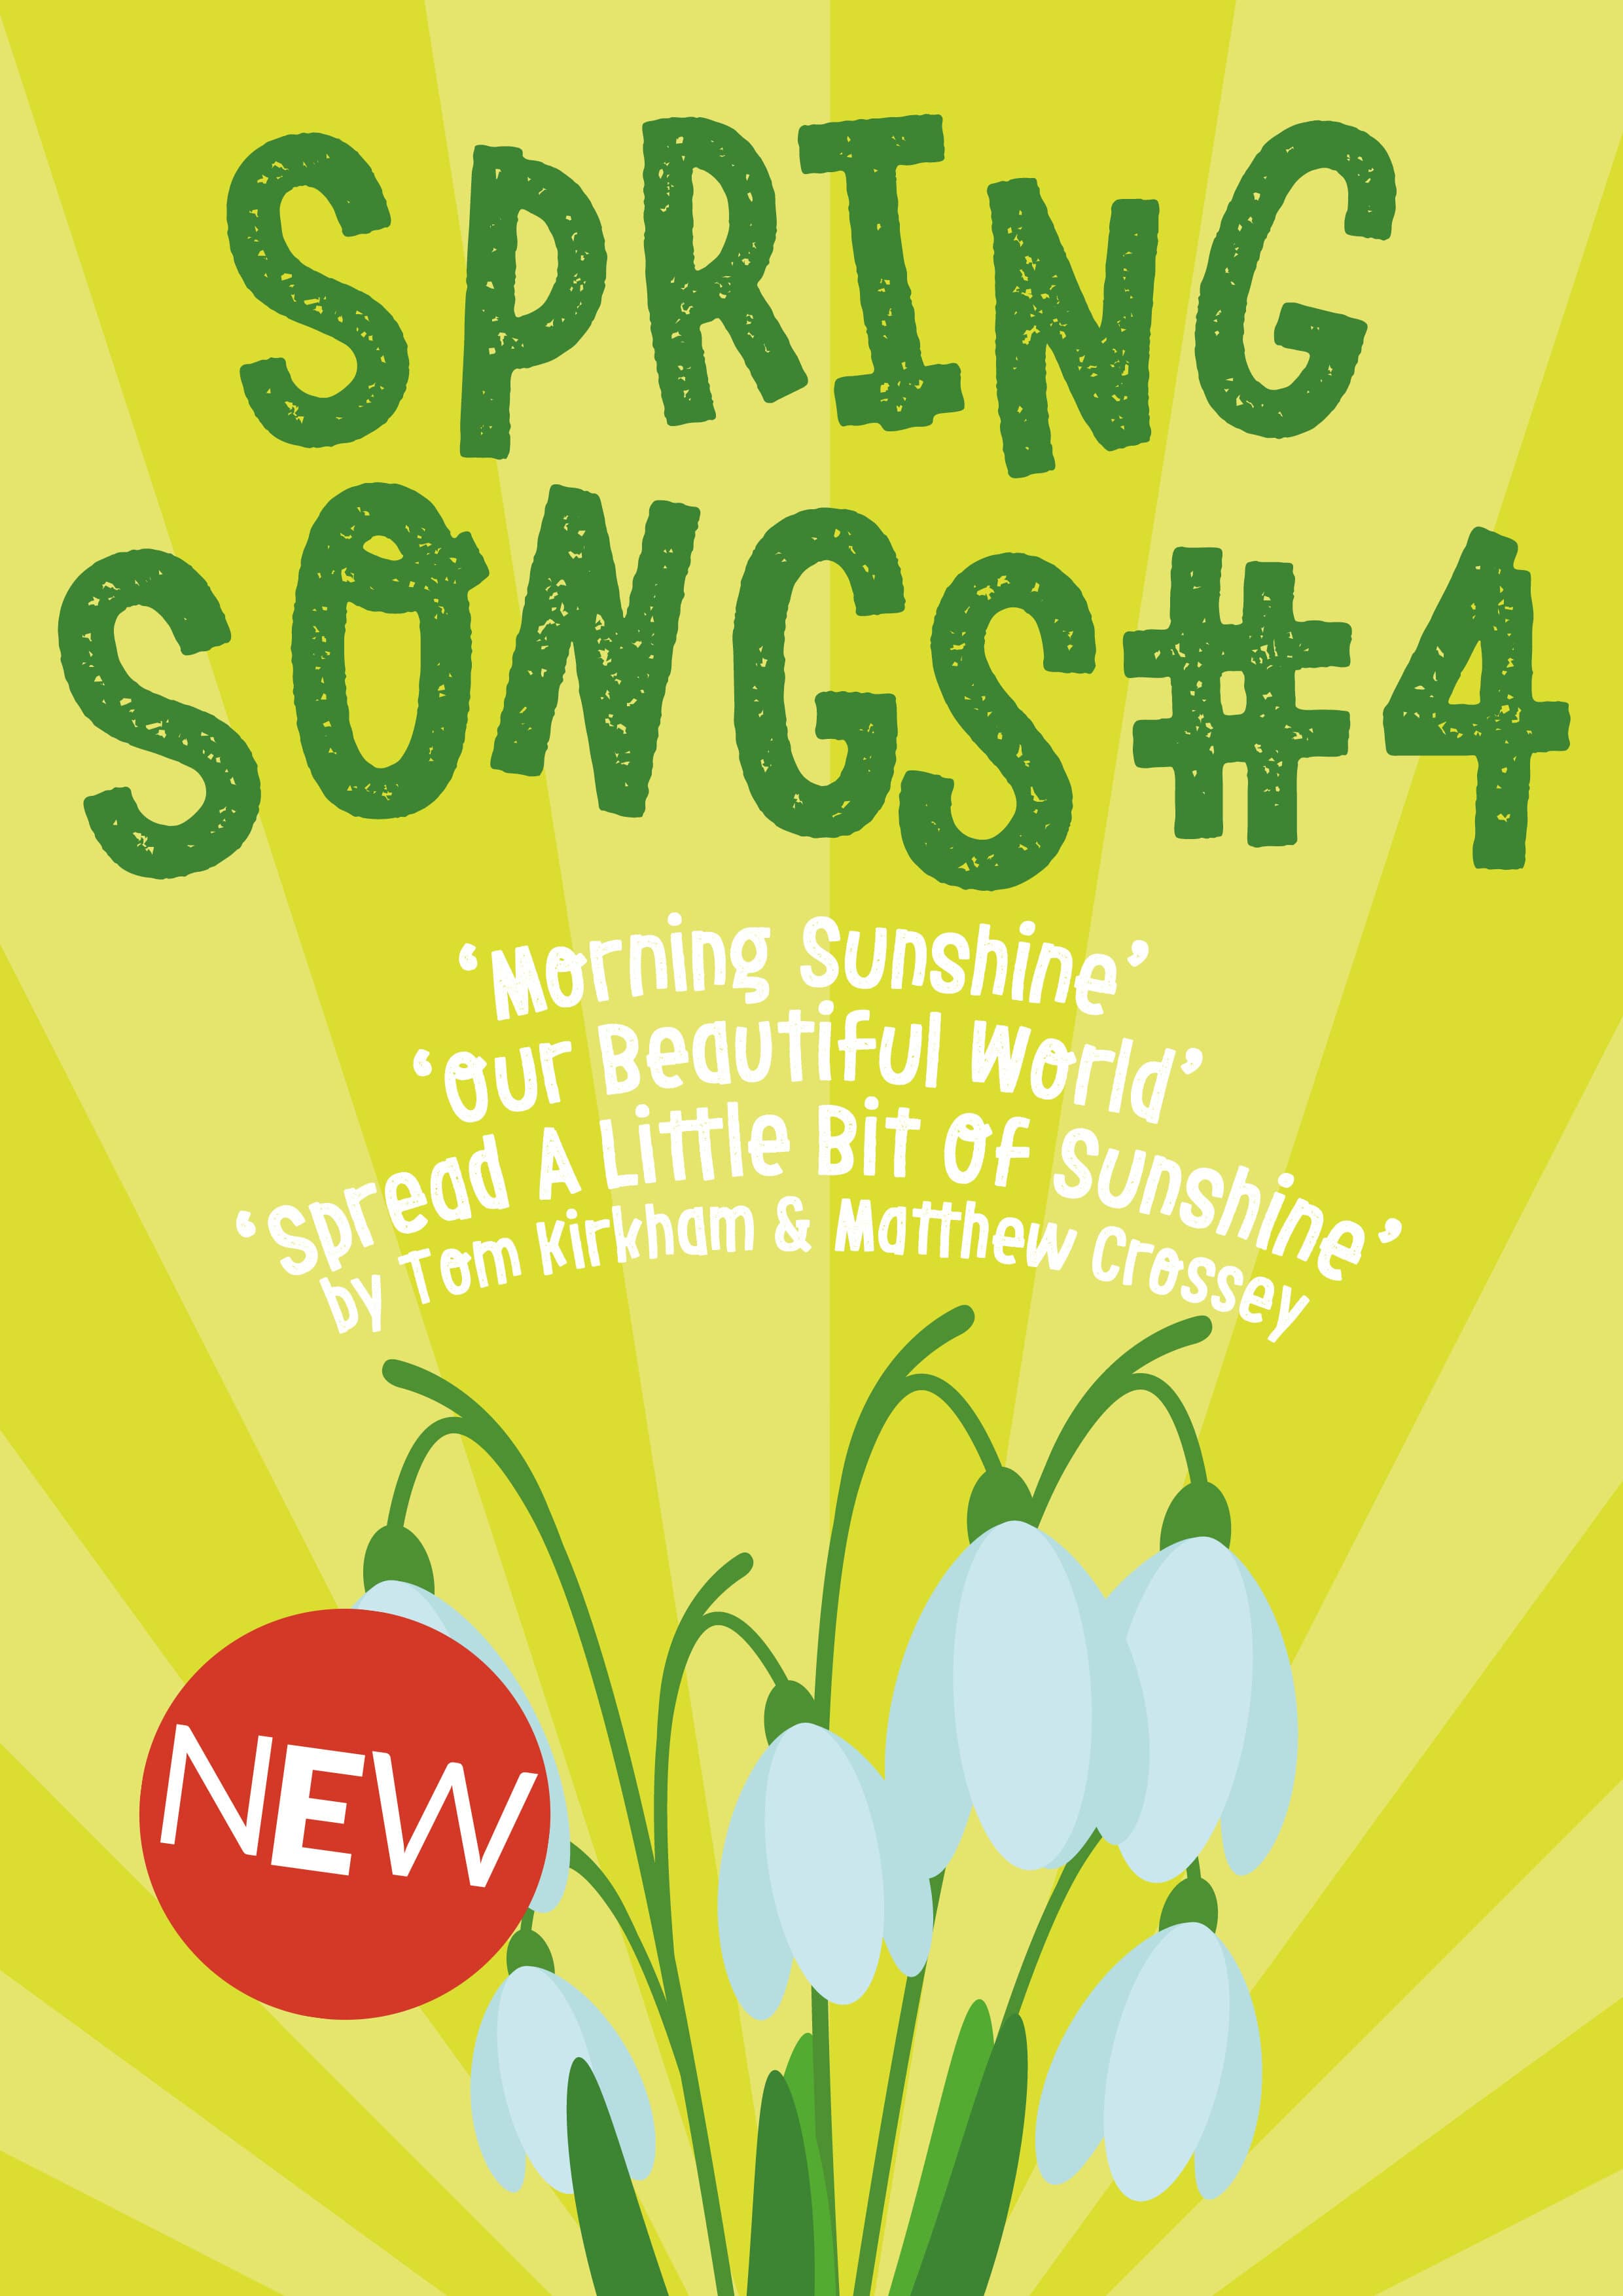 Spring Songs #4 Download Pack - 100% Discount With Code SPRING400